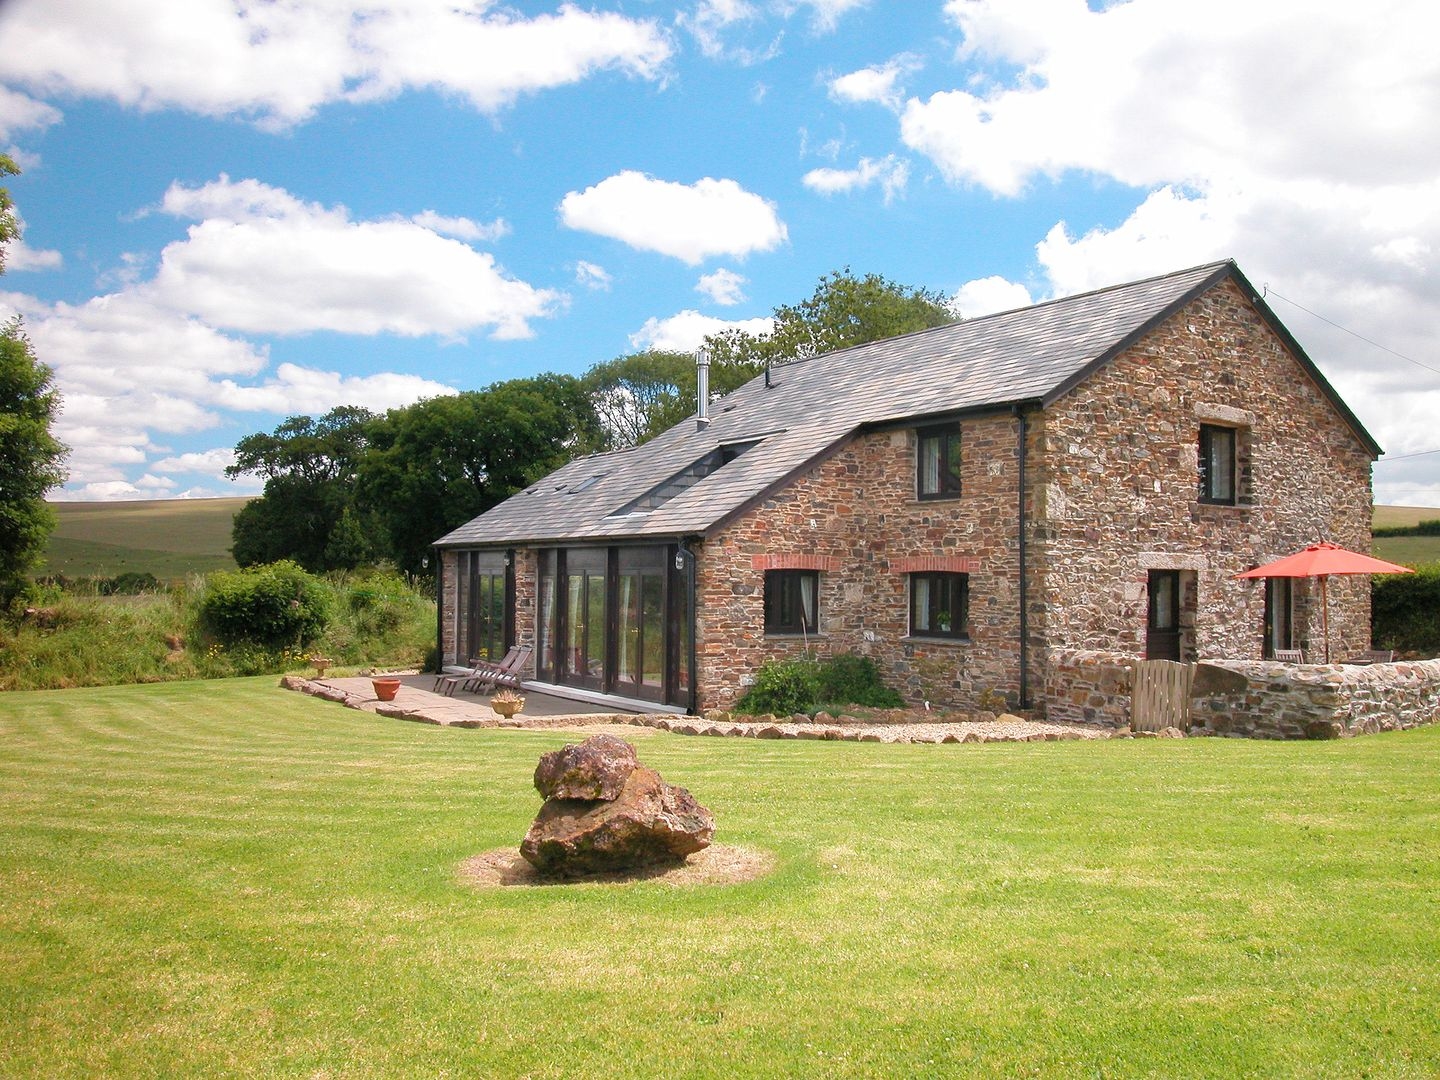 Holiday Cottages in Devon: The Red Barn, Lydford | sykescottages.co.uk 